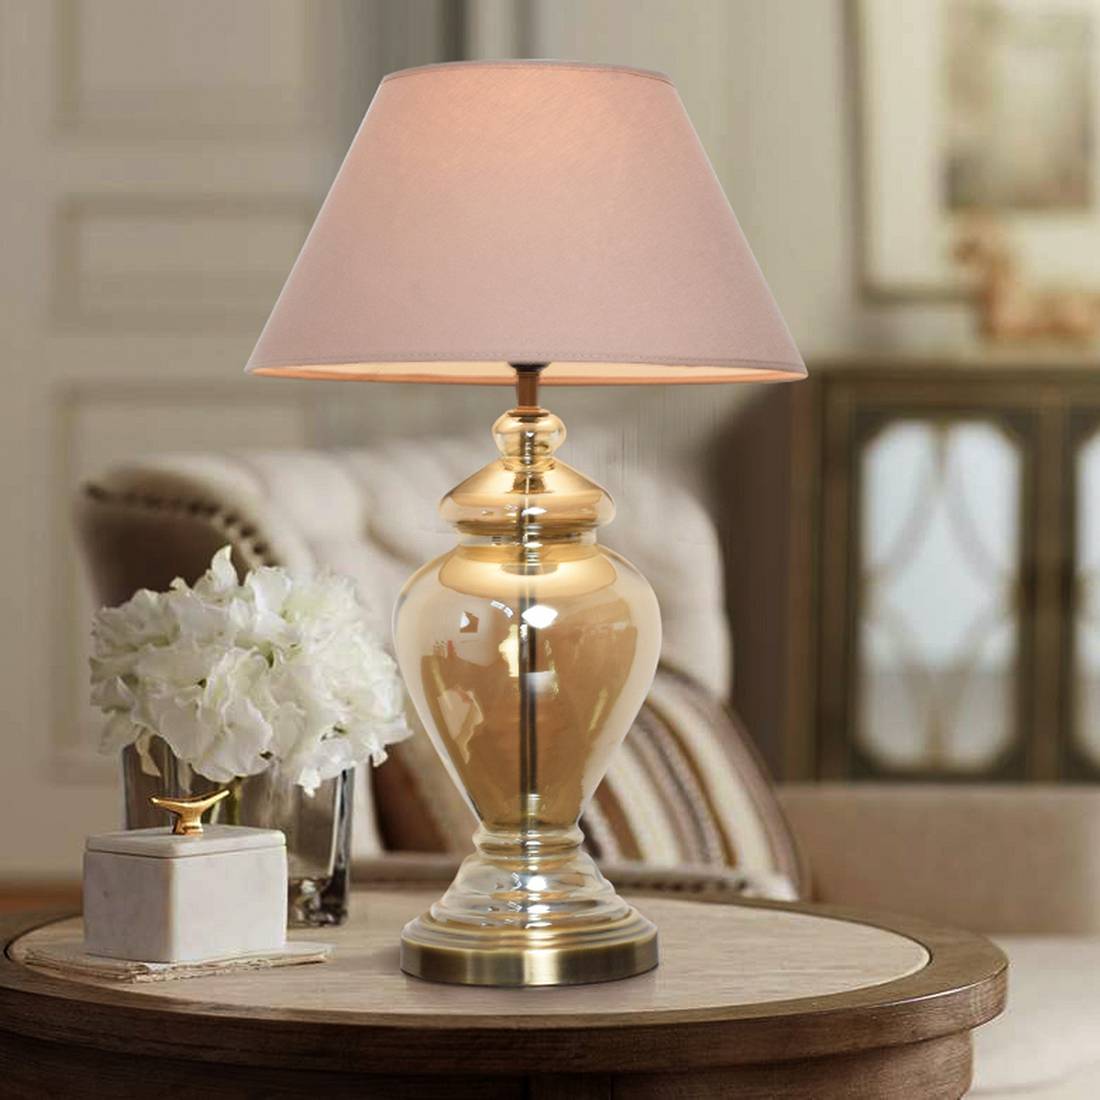 How to Choose Lamps for Your Home